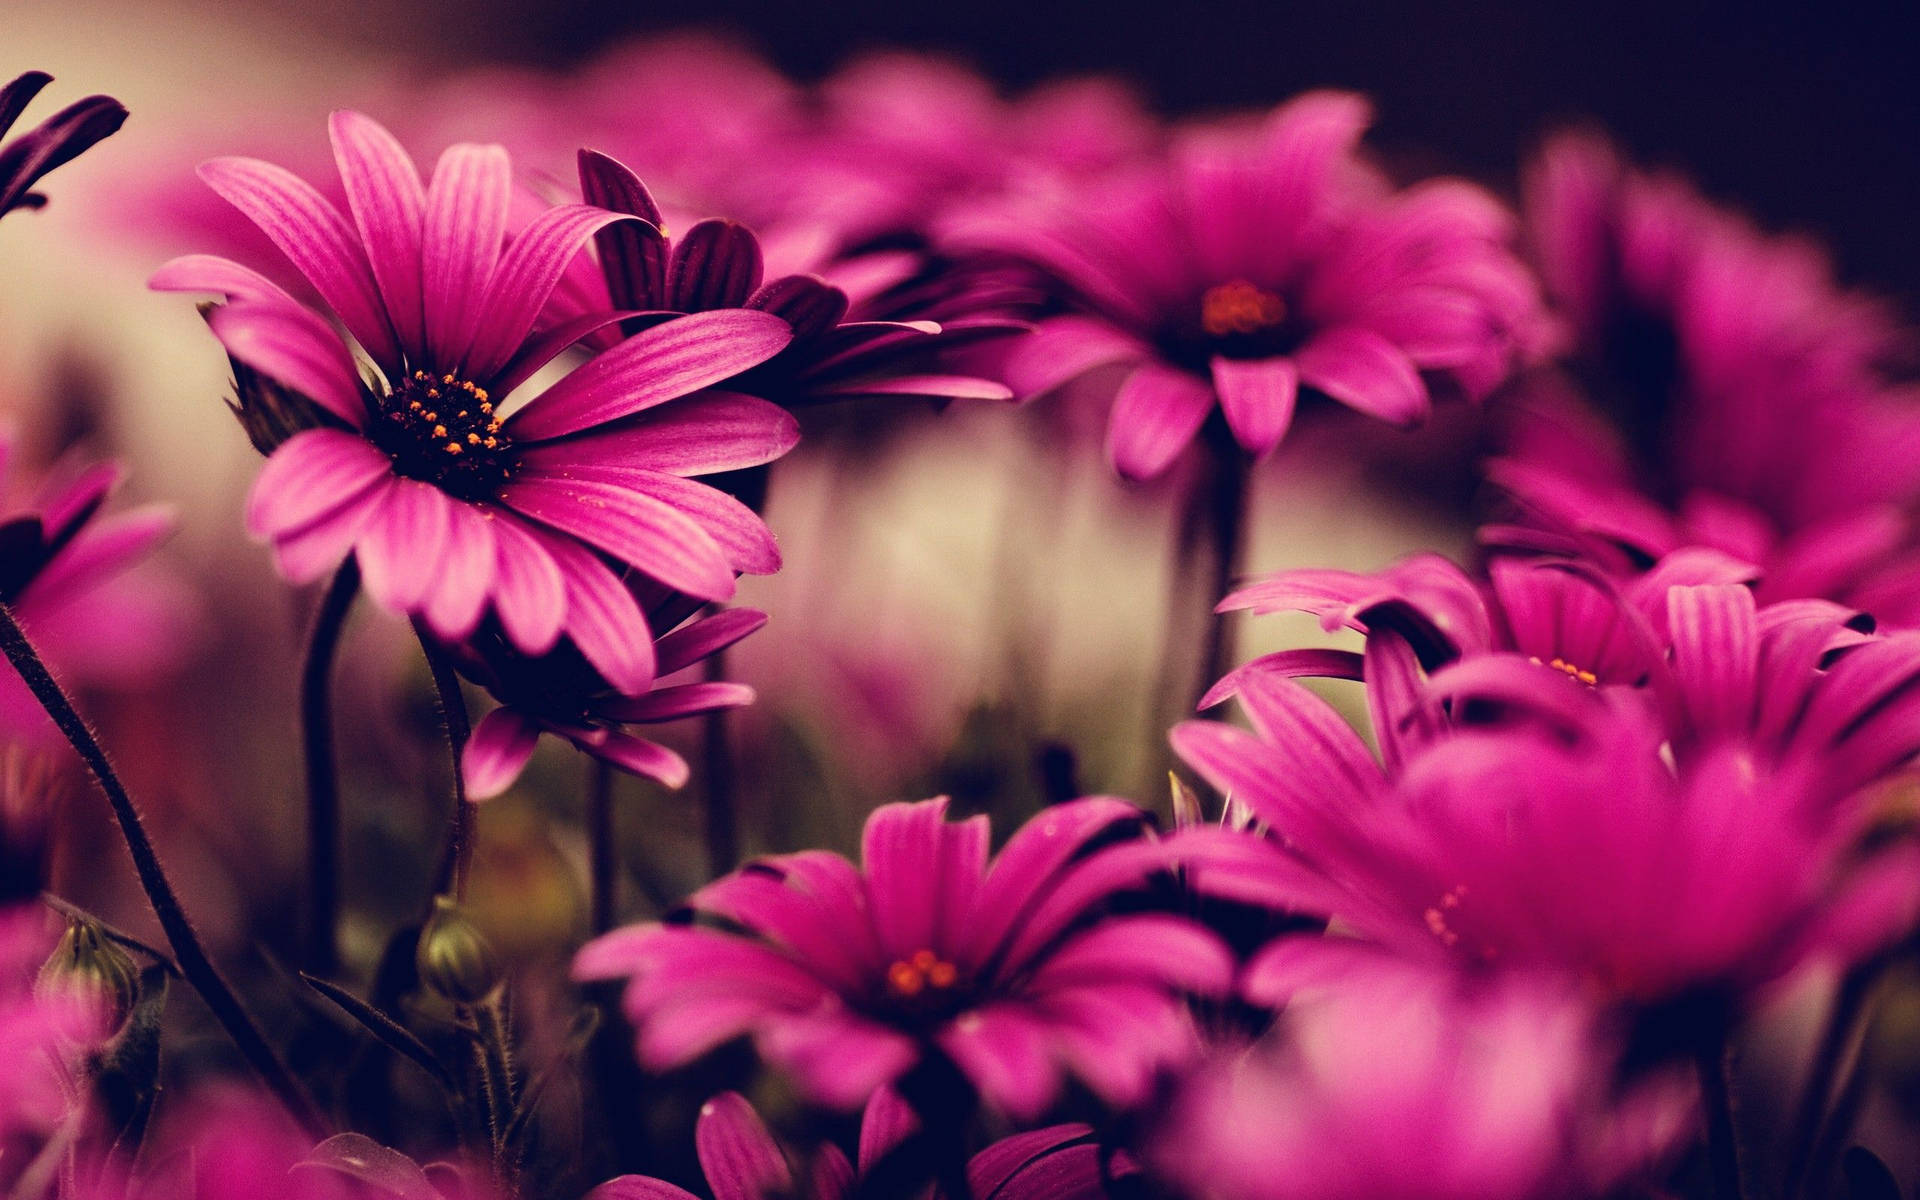 The beauty of a gloomy pink flower Wallpaper